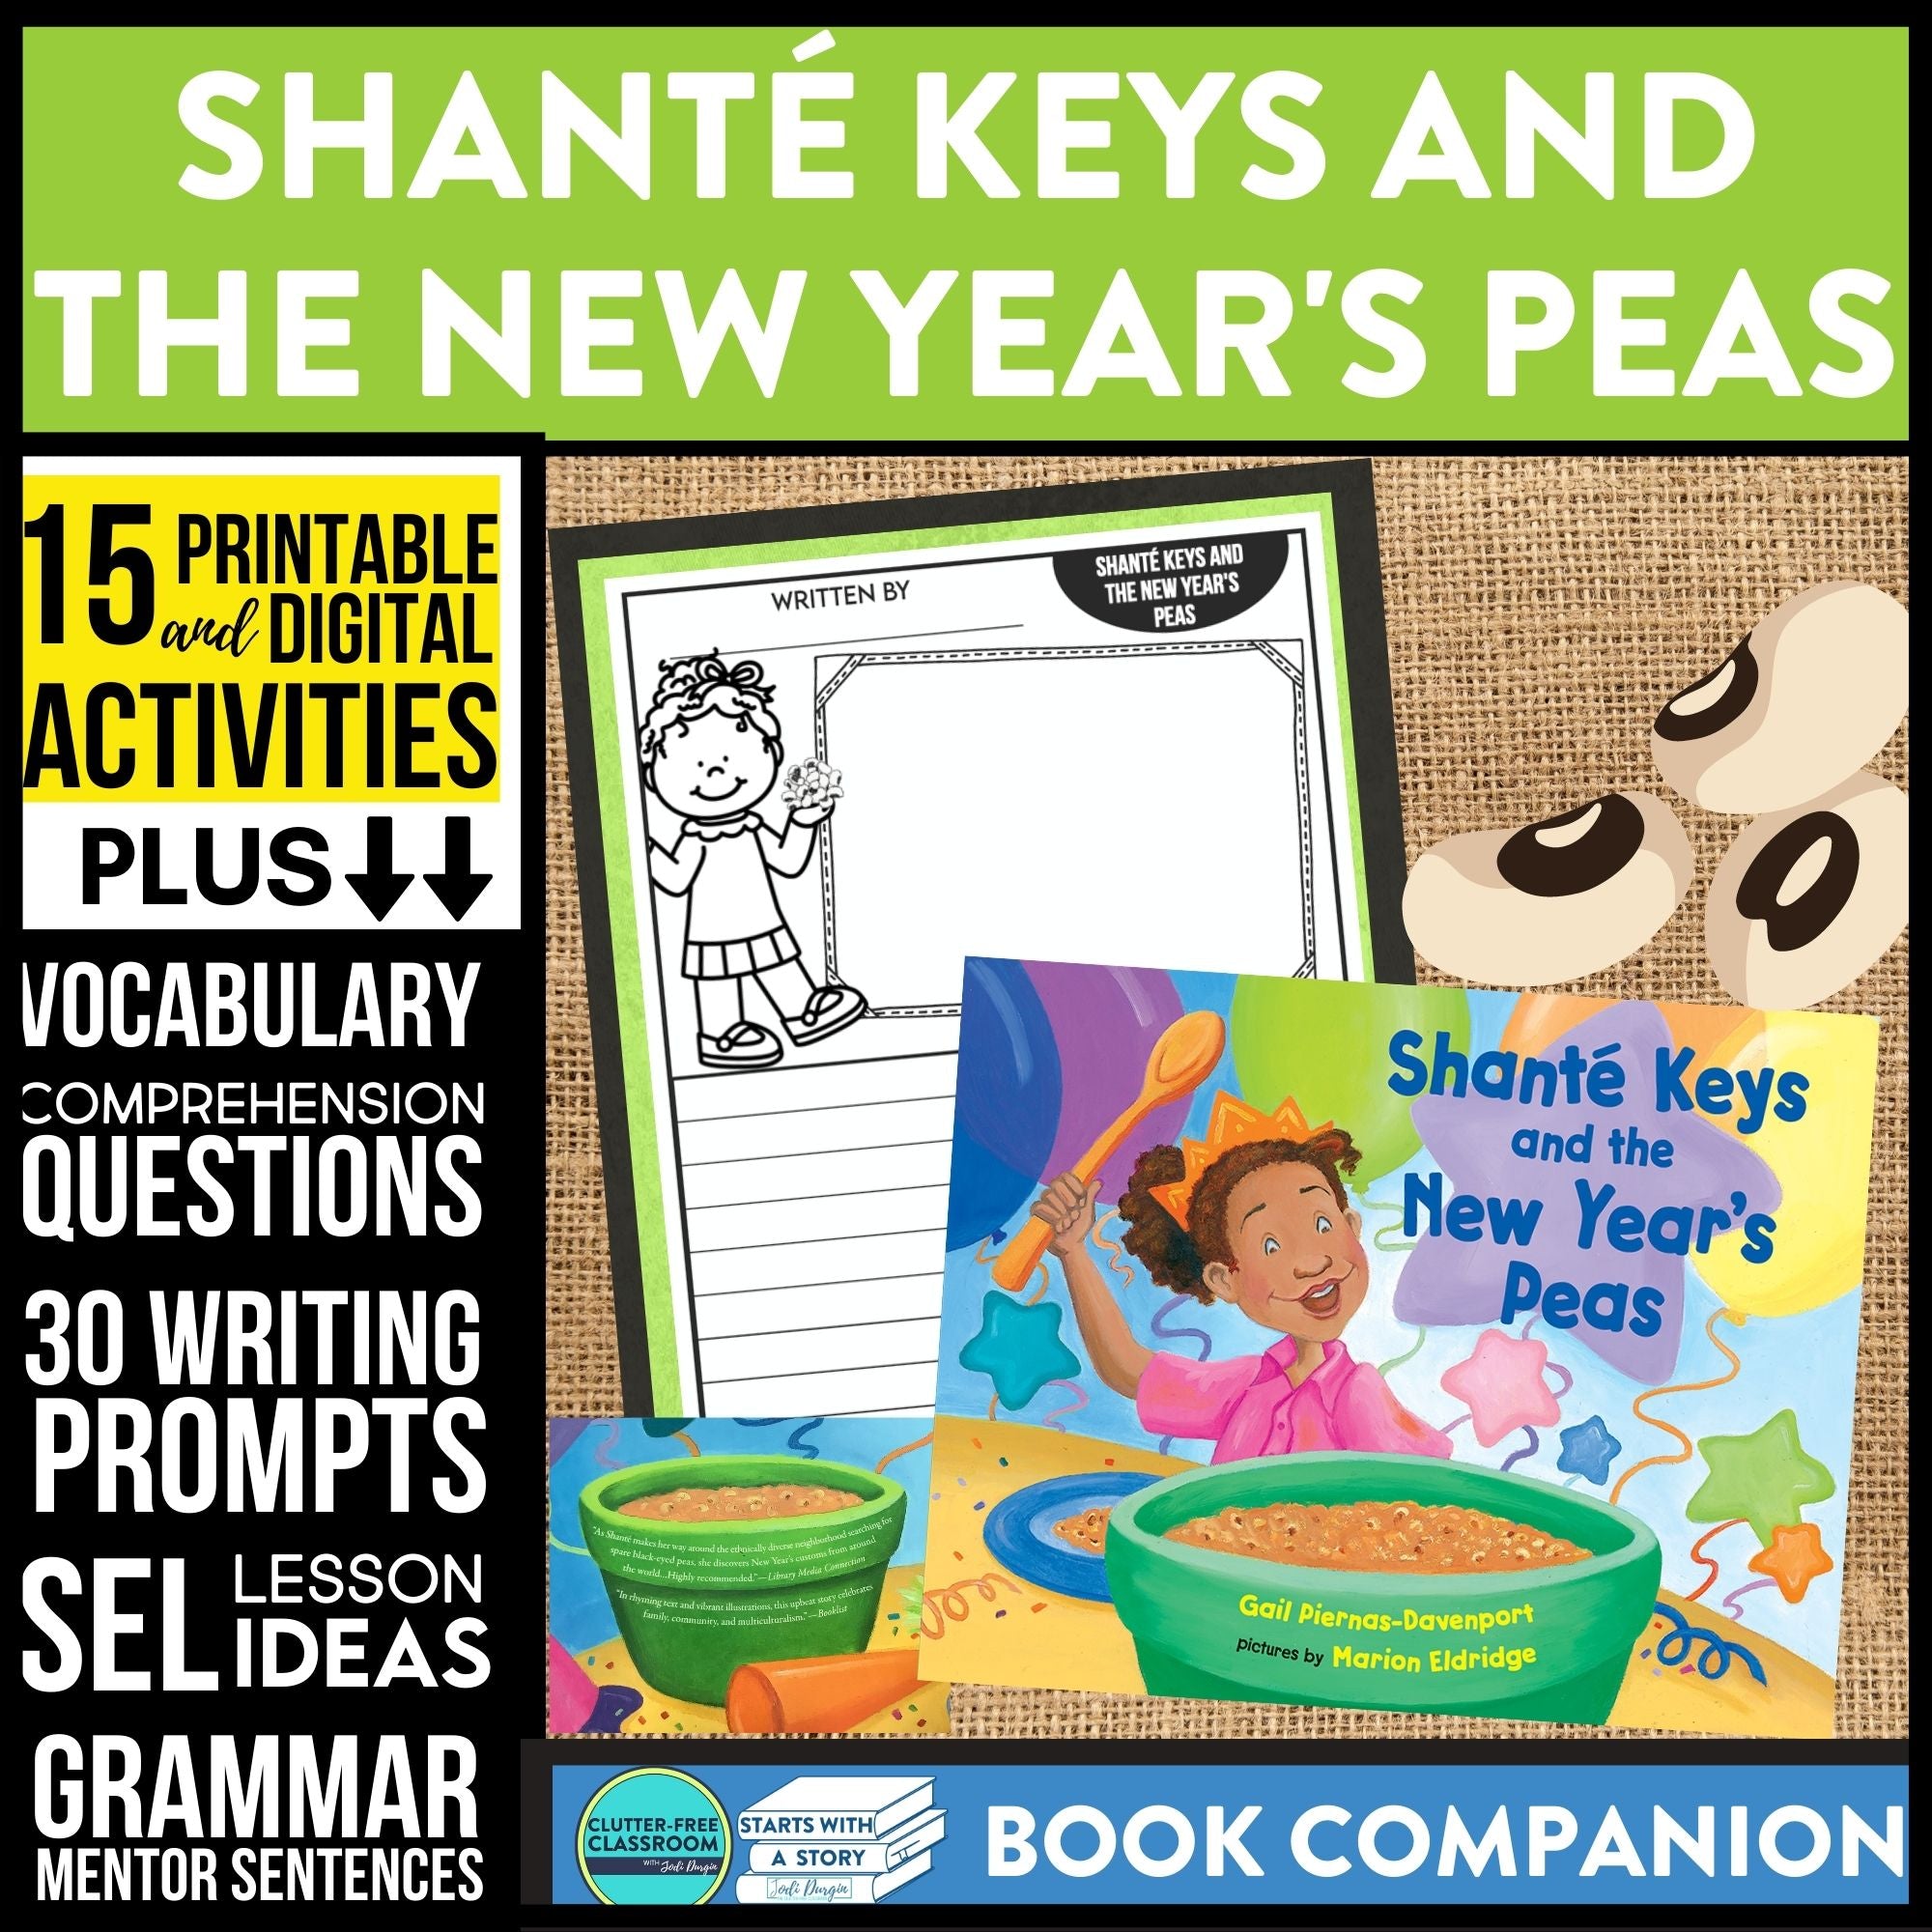 SHANTE KEYS AND THE NEW YEAR'S PEAS activities and lesson plan ideas